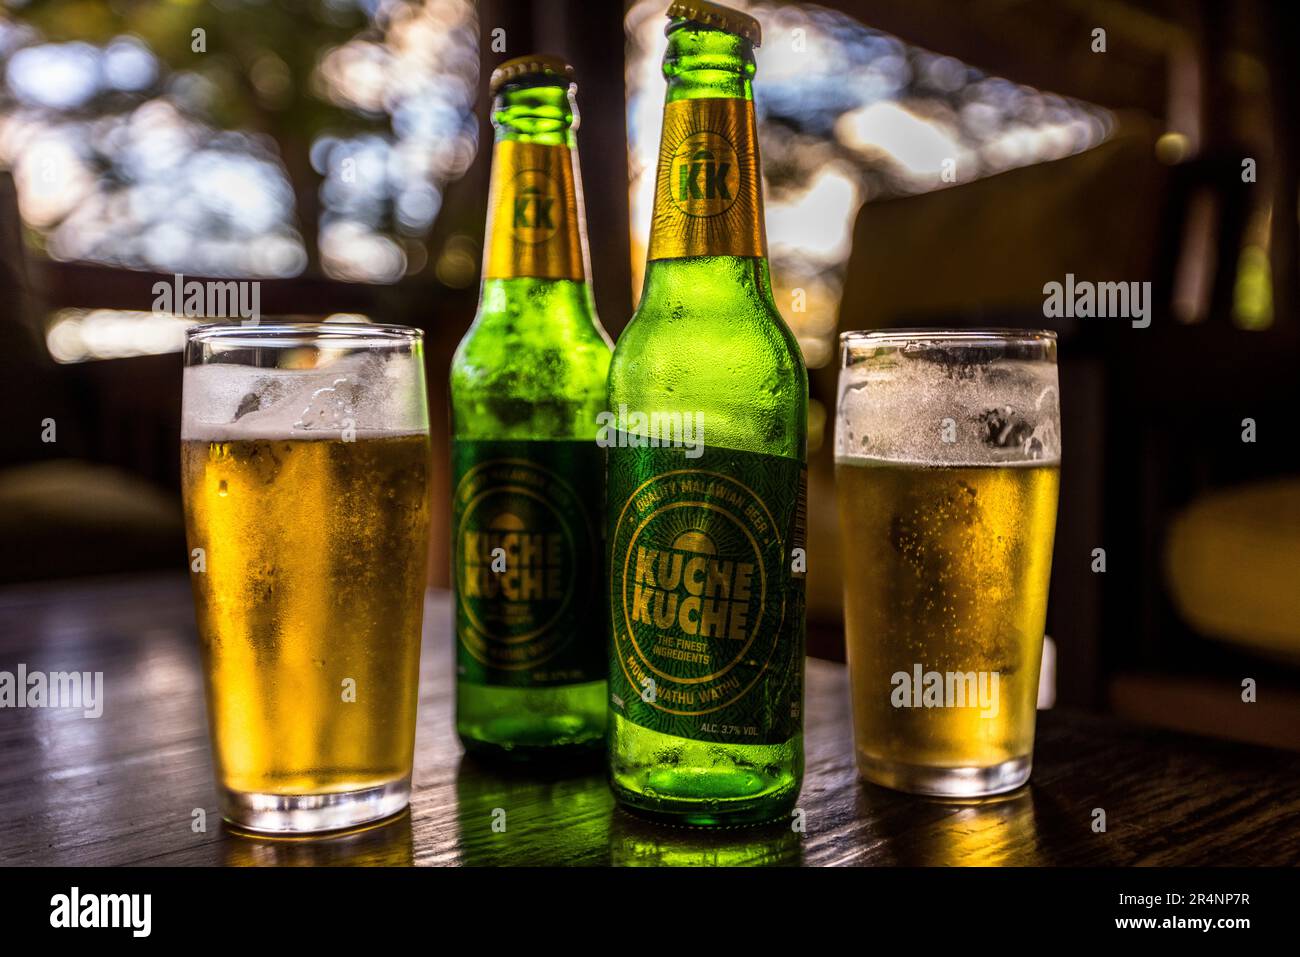 Malawian beer bottle. Kuche Kuche is a locally brewed light beer from Malawi. The name translated means drinking until dawn. Kuche Kuche is the brand of beer from Malawi that you can proverbially drink until dawn. Kumbali Country Lodge in Lilongwe, Malawi Stock Photo